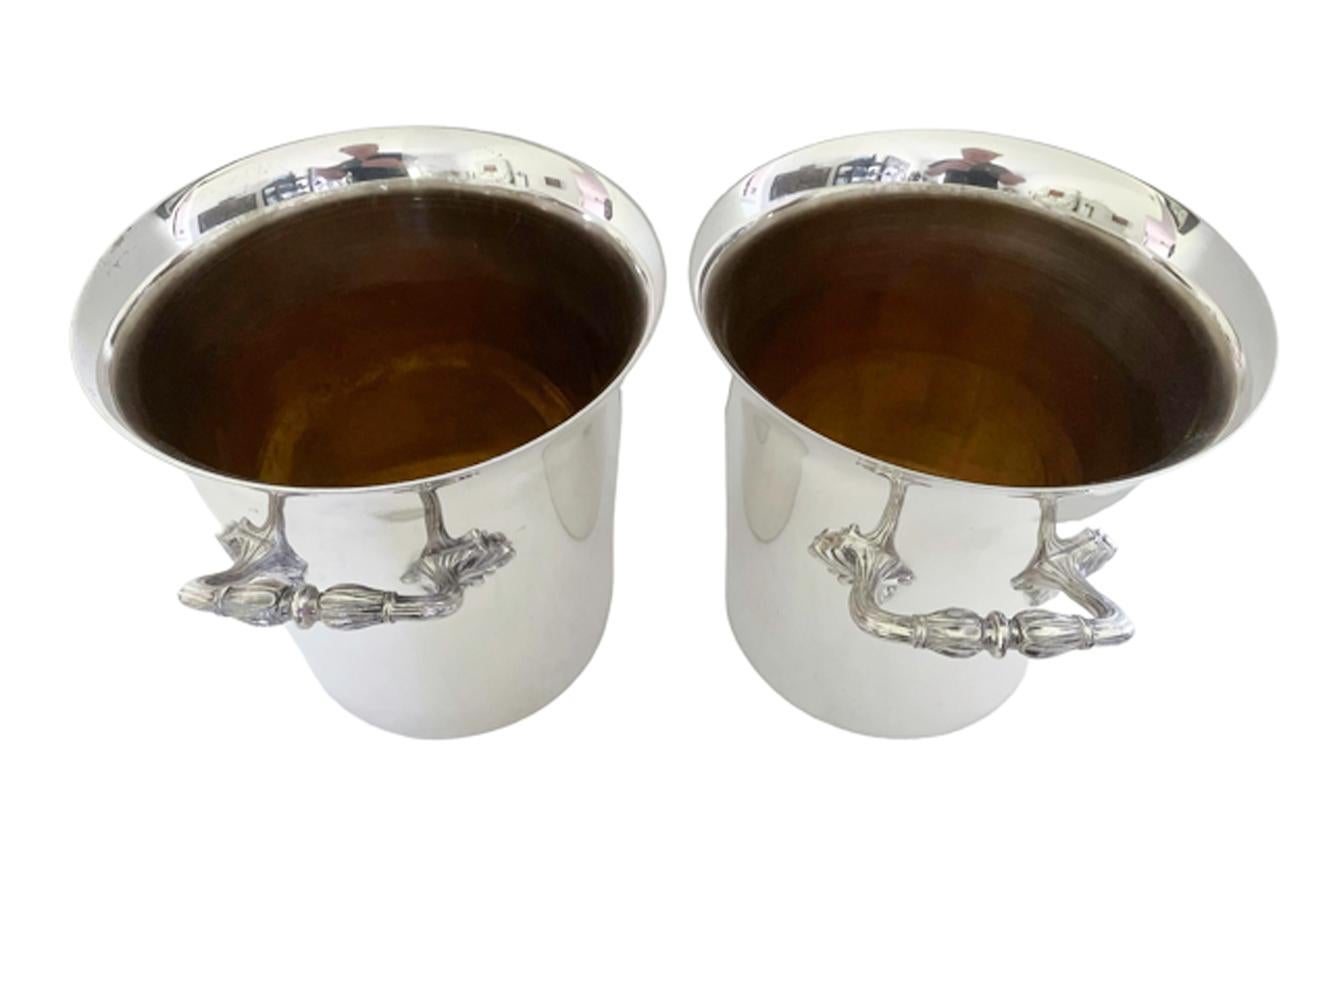 Pair of French Art Deco Champagne buckets / wine coolers of tapered form with flared rim and acanthus leaf molded handles. French makers mark on bottom (unidentified).